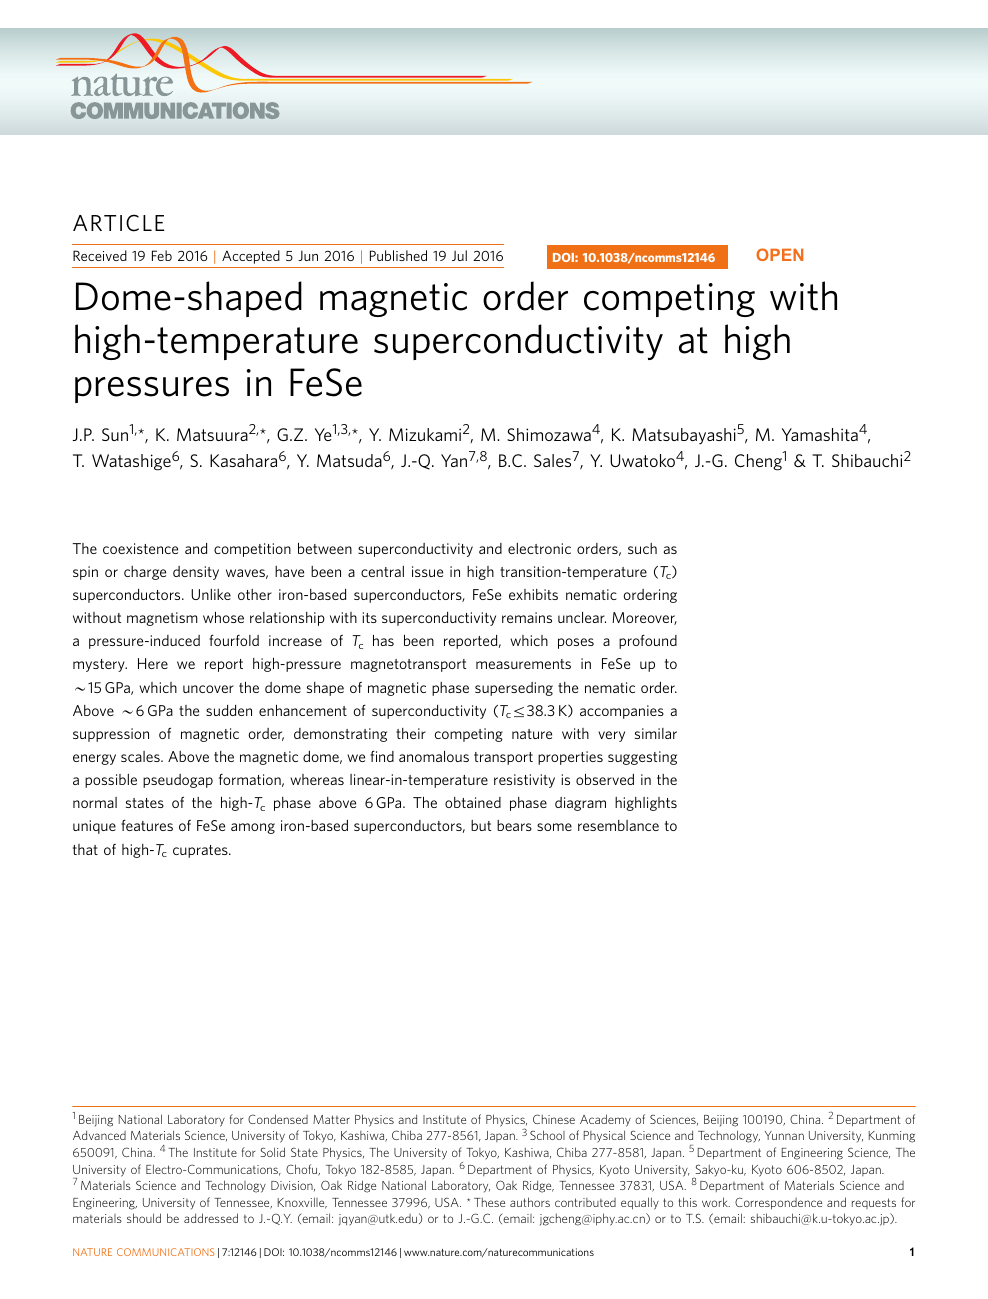 Dome Shaped Magnetic Order Competing With High Temperature Superconductivity At High Pressures In Fese Topic Of Research Paper In Physical Sciences Download Scholarly Article Pdf And Read For Free On Cyberleninka Open Science